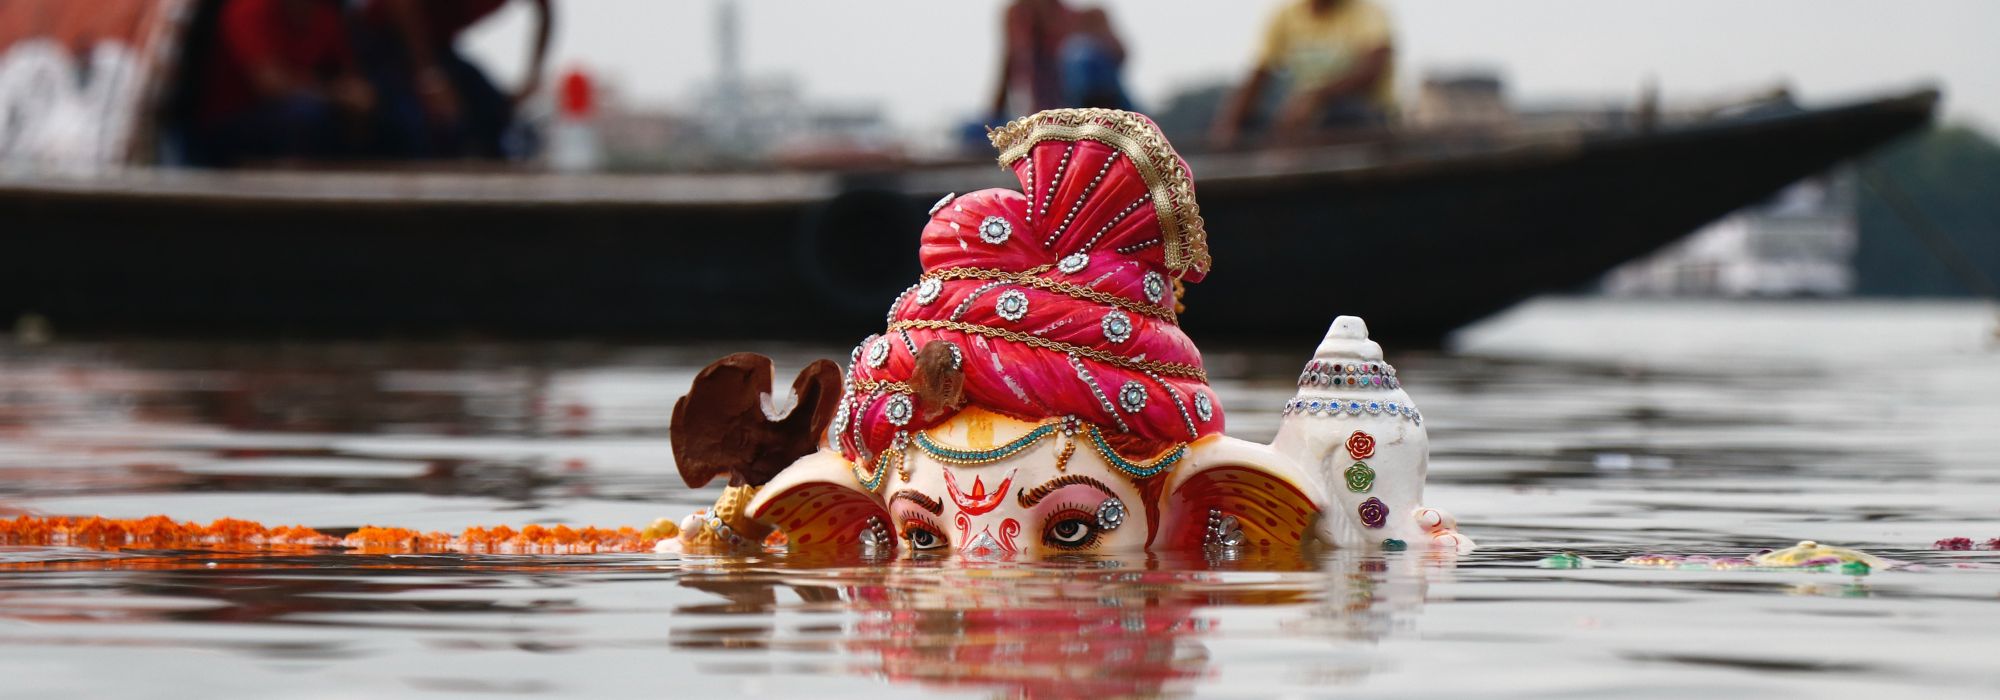 Lord Ganesha statuette in water